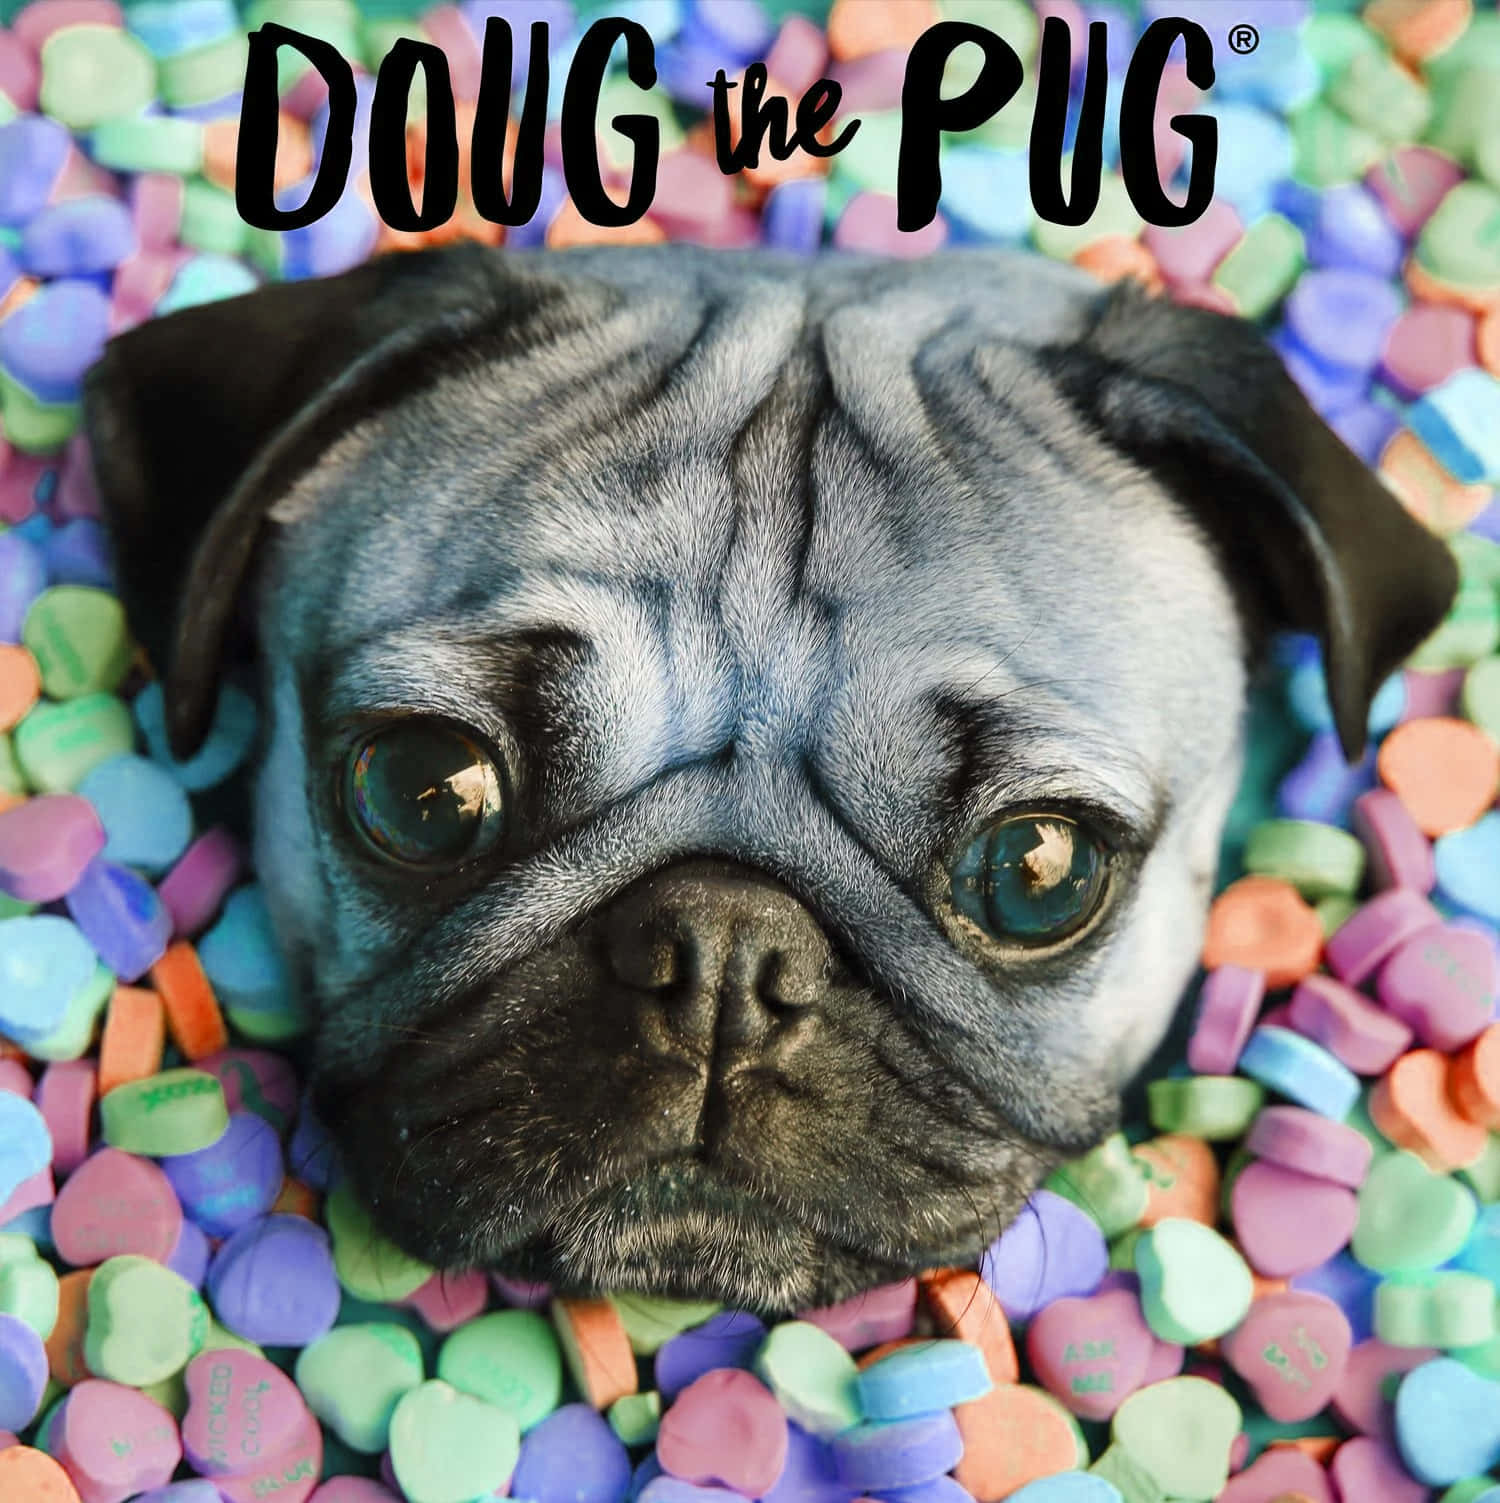 Download Cute Pug Surrounded By Small Colorful Hearts Wallpaper | Wallpapers .com